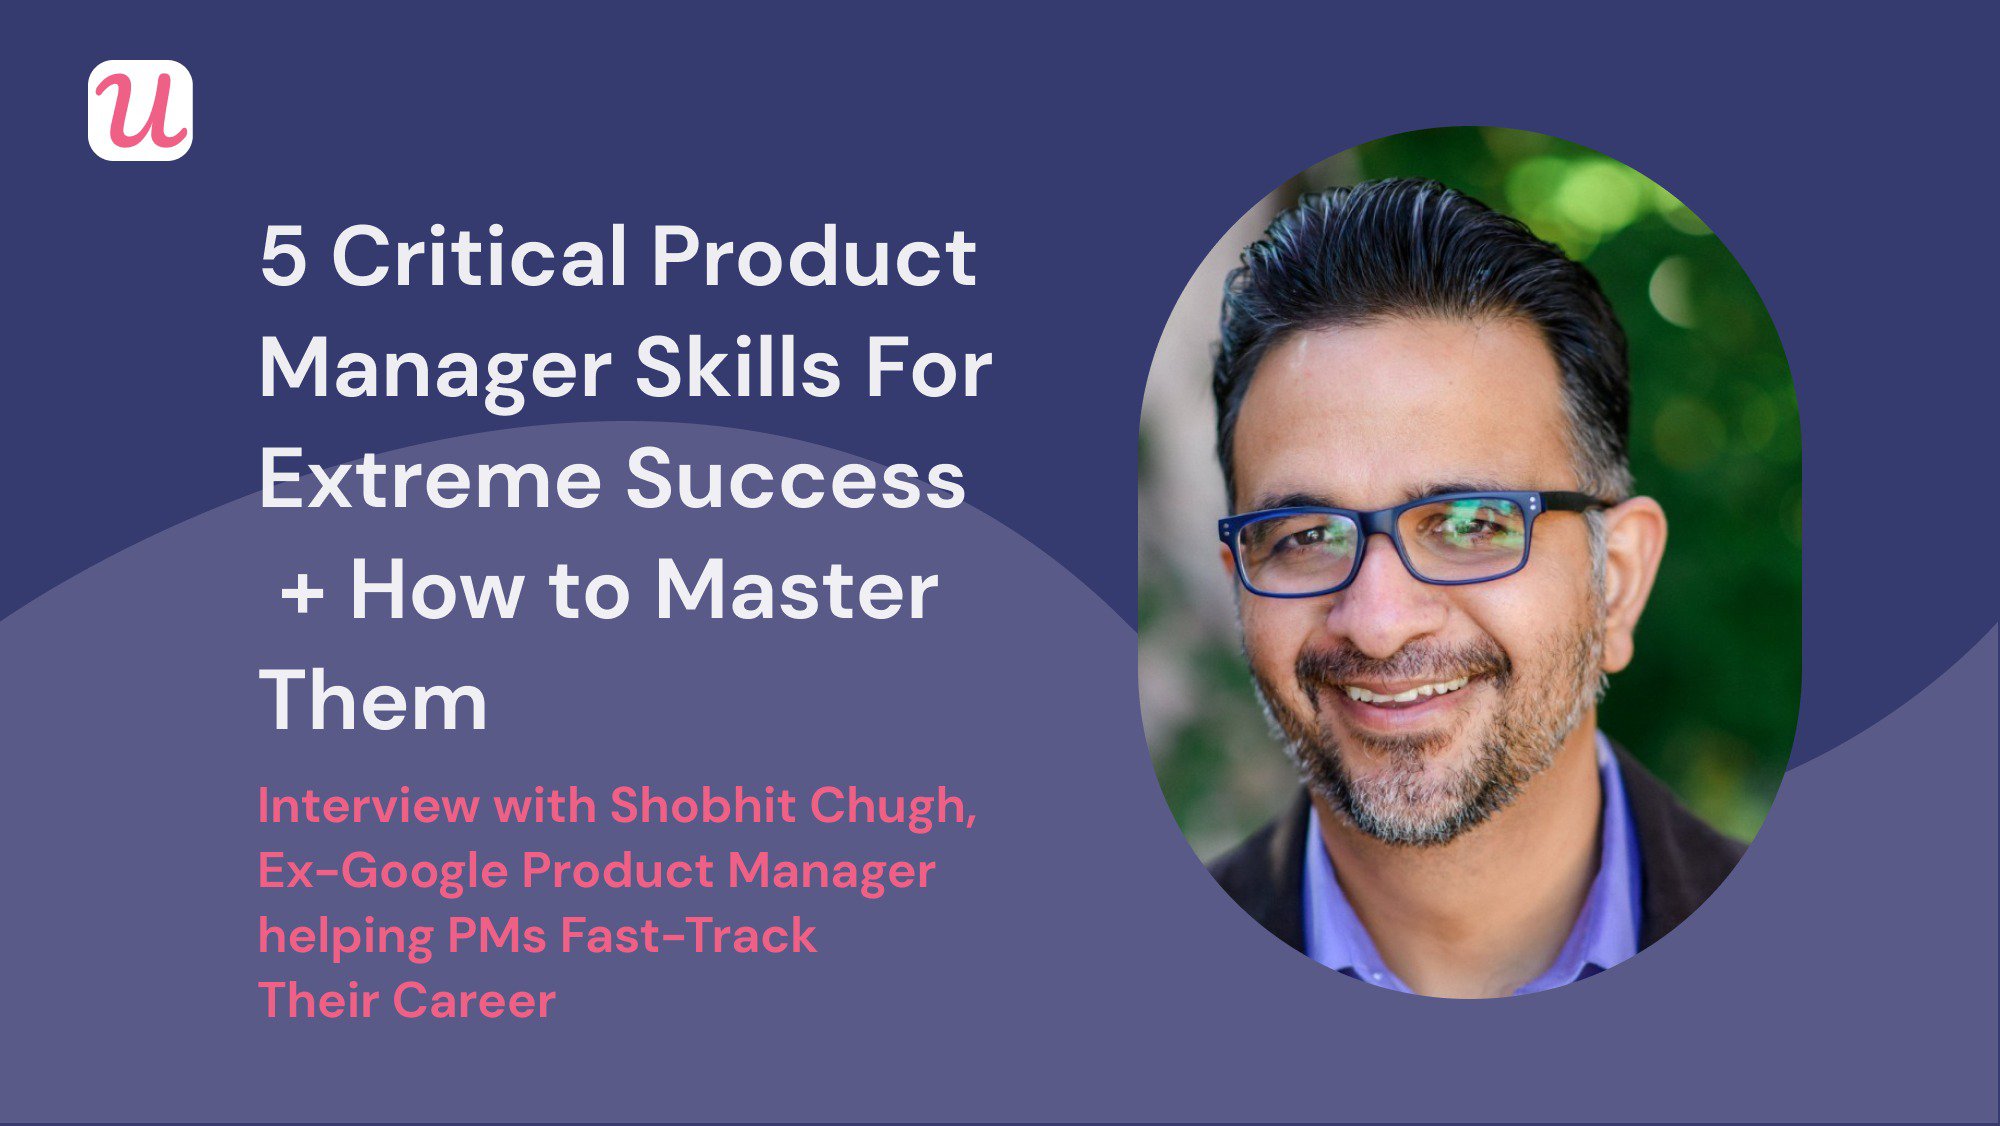 5 Critical Product Manager Skills For Extreme Success + How to Master Them. Interview with Shobhit Chugh - Ex-Google Product Manager helping PMs Fast-Track Their Career